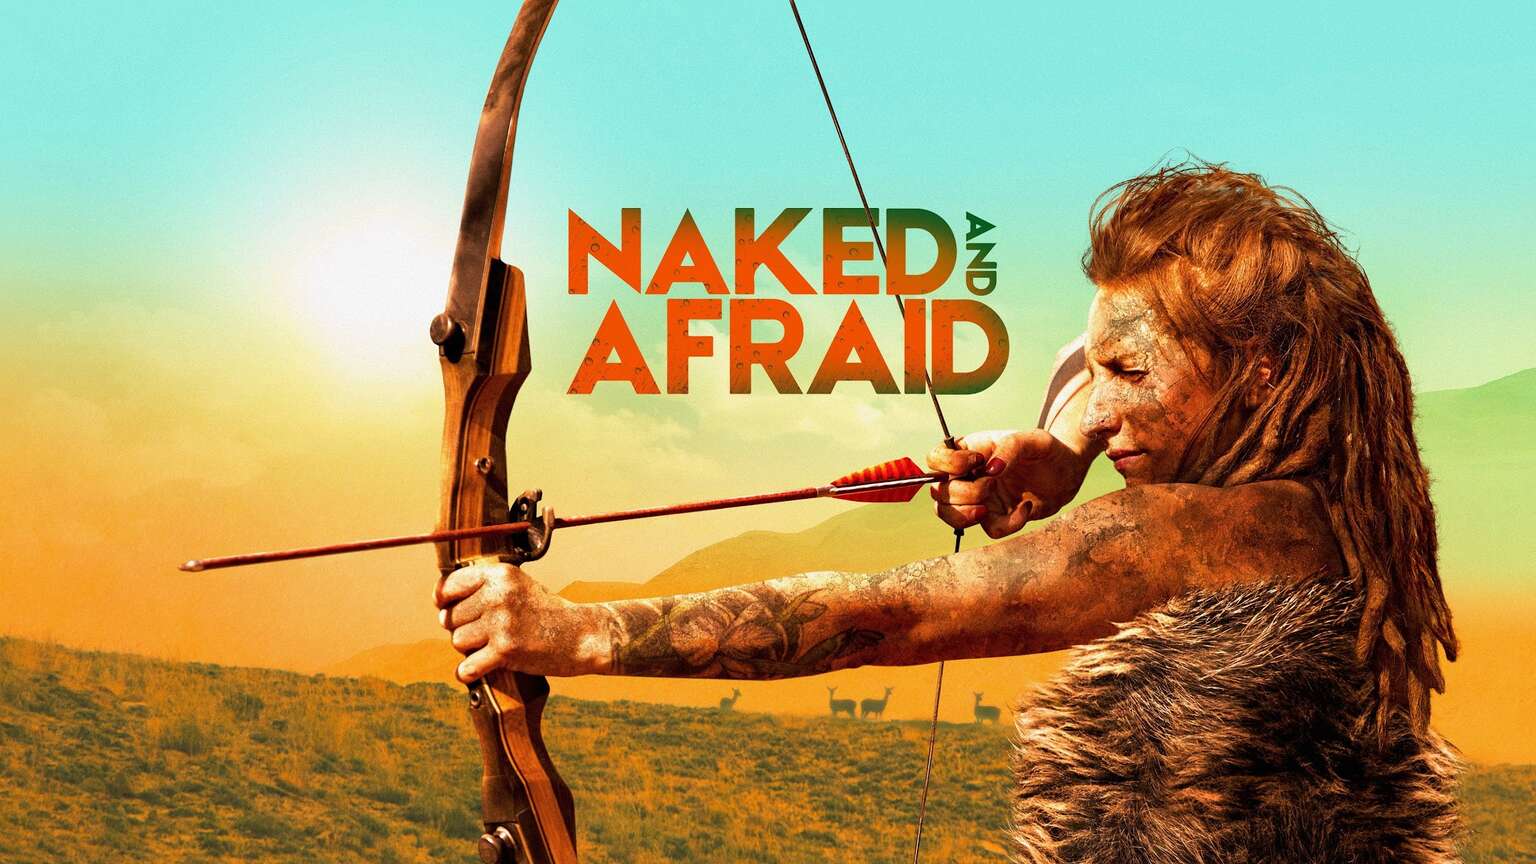 How To Watch Naked And Afraid